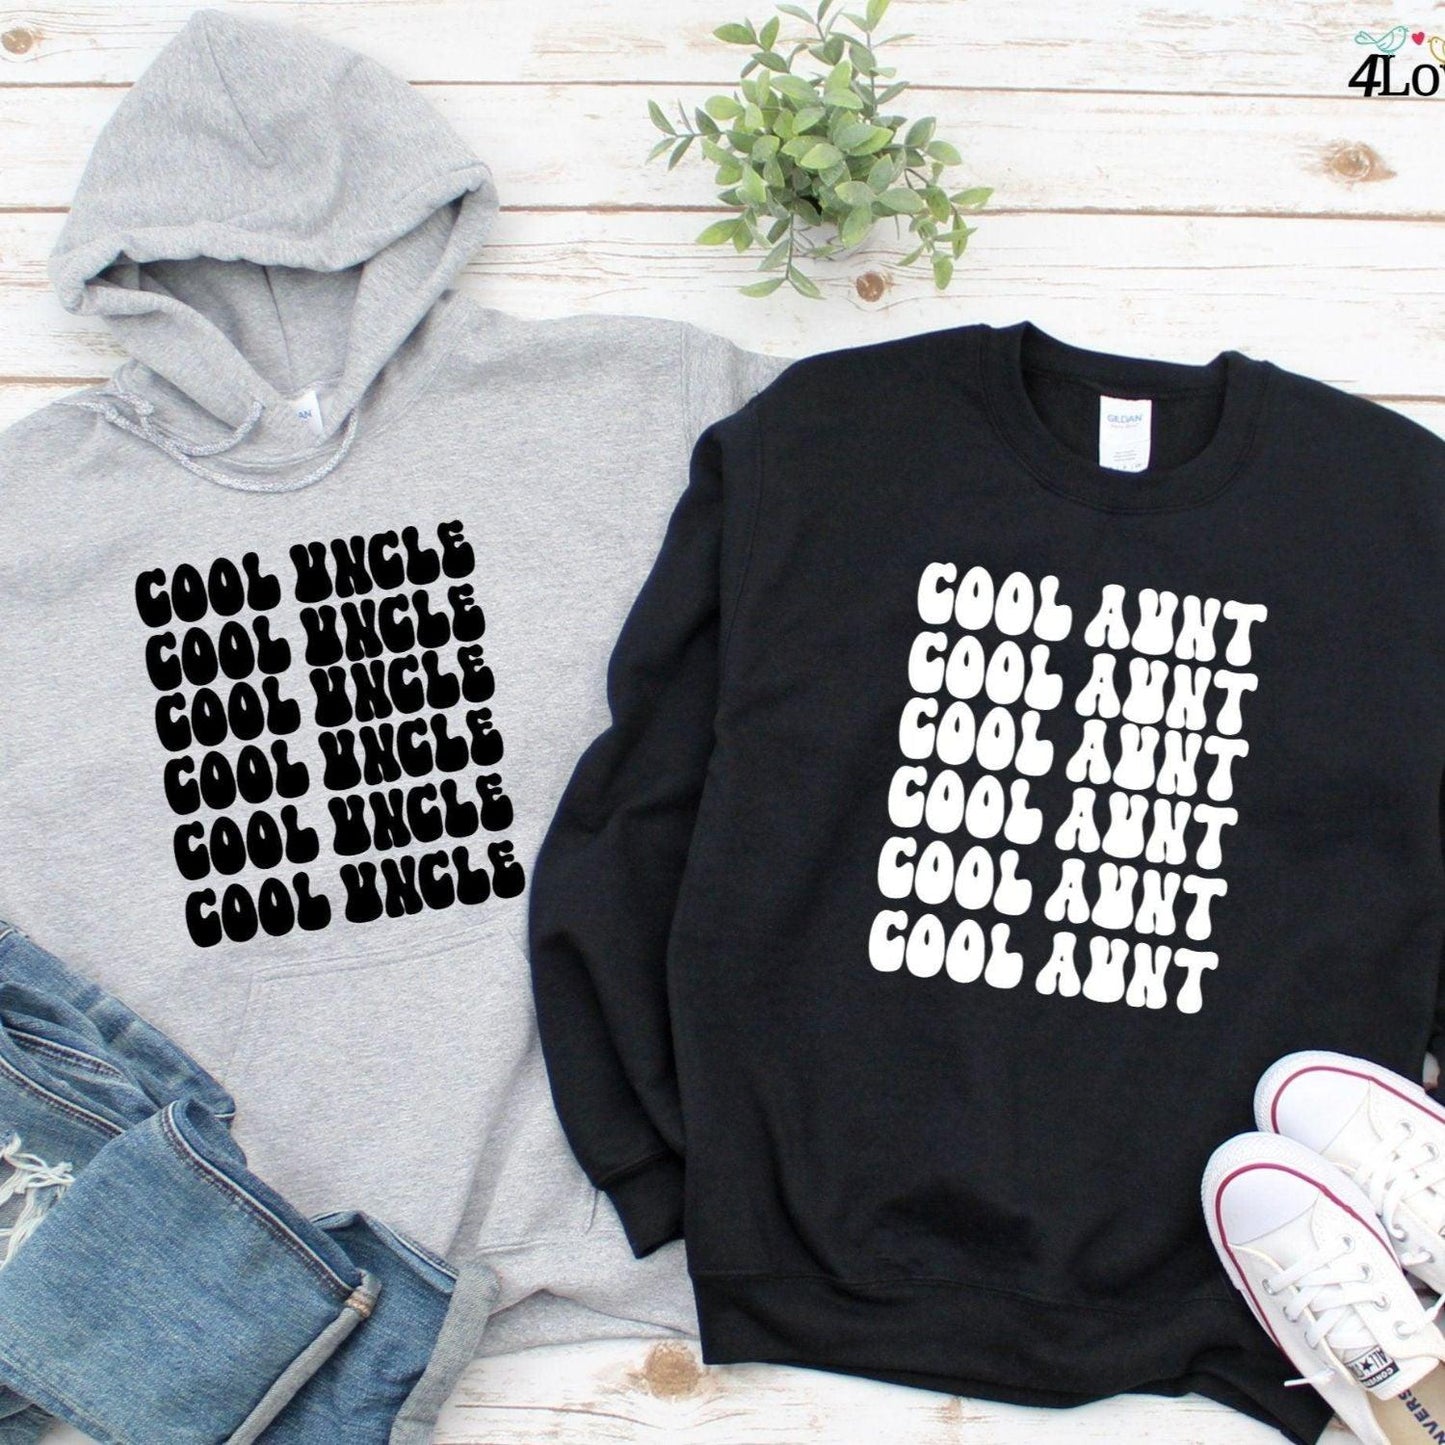 Cool Aunts & Uncles Matching Outfits: The Ideal Present for Siblings & Aunties! - 4Lovebirds